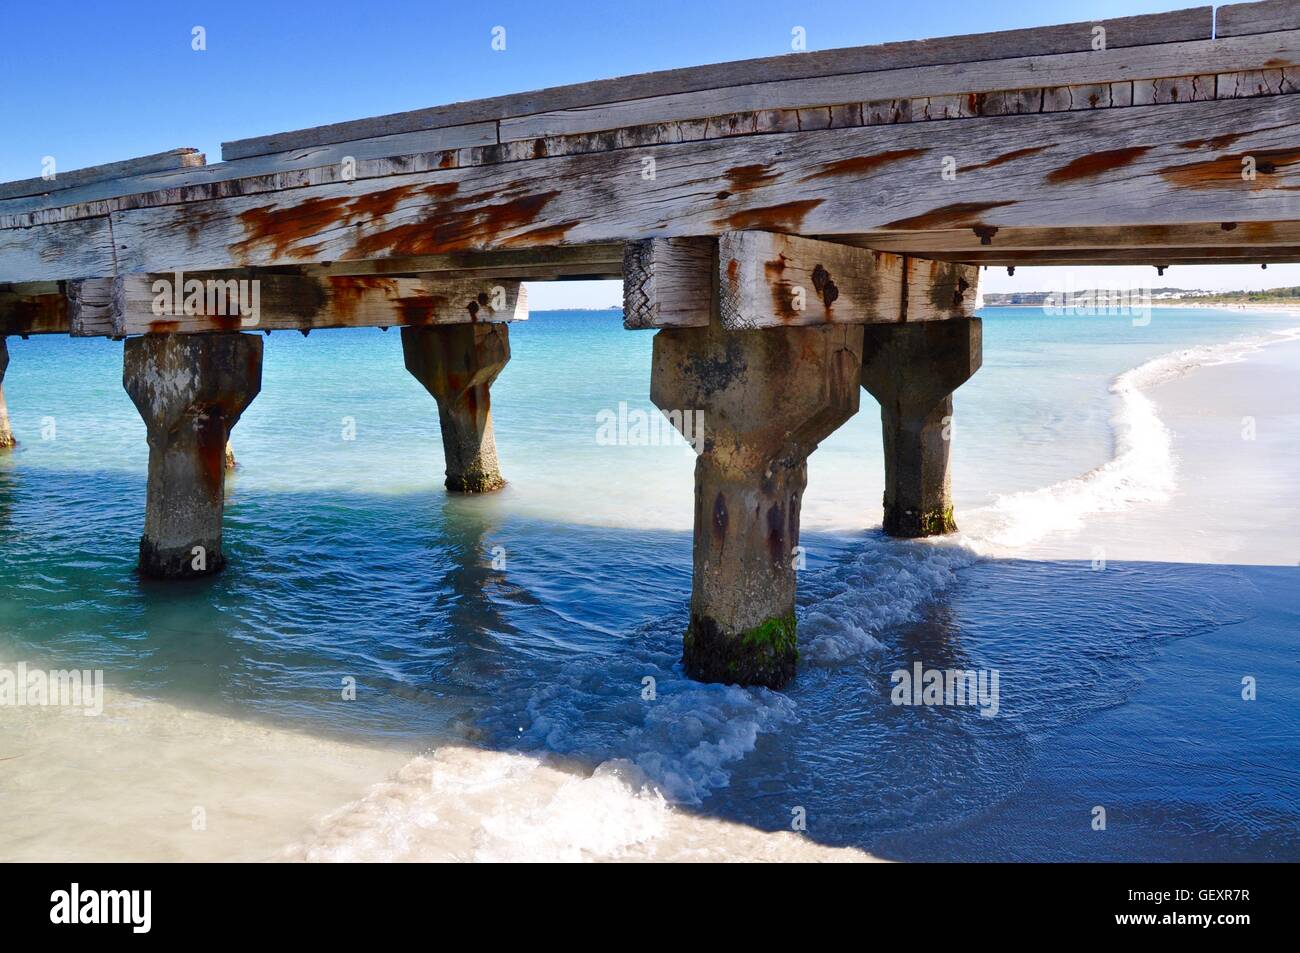 Portion of the Coogee Beach jetty structure with turquoise Indian Ocean waters on the coast of Coogee, Western Australia. Stock Photo